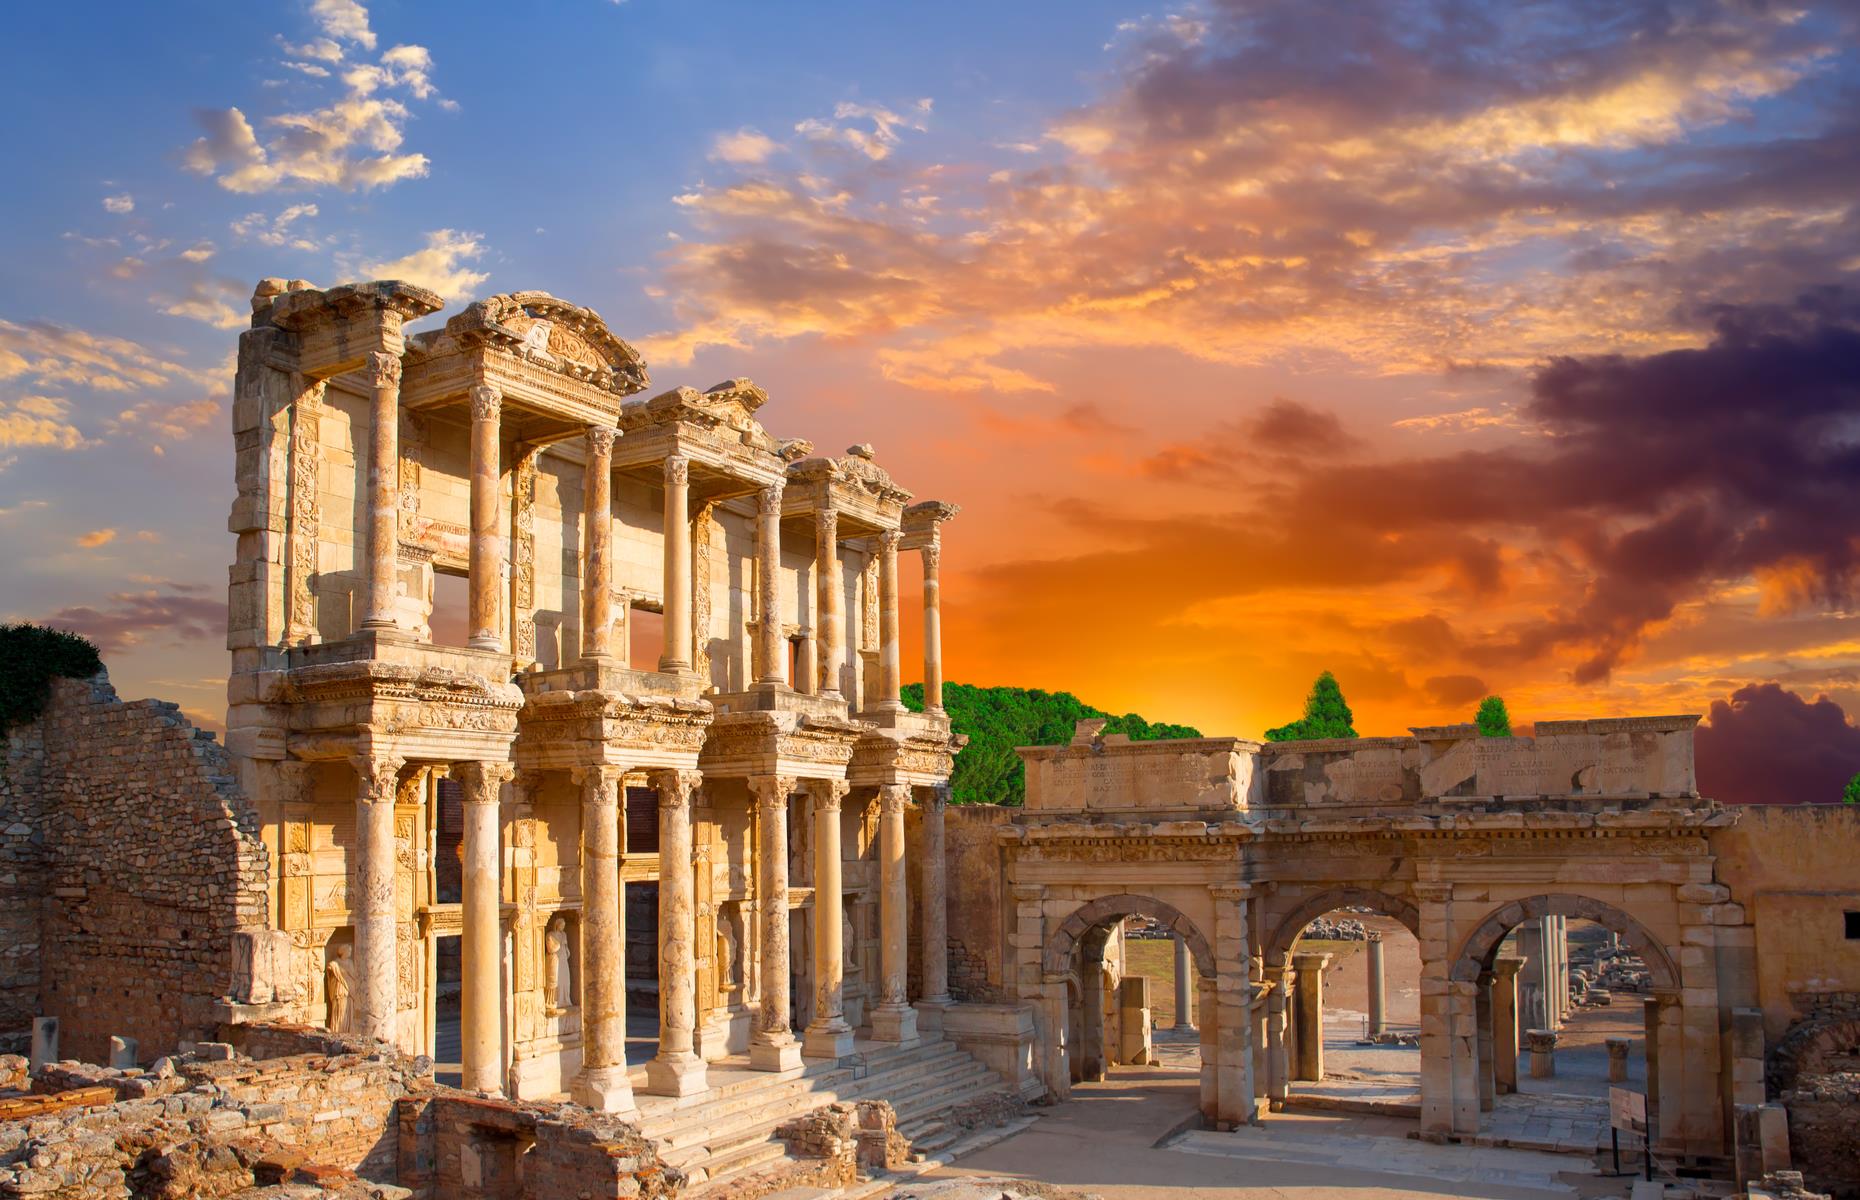 <p>Ephesus was once one of the wealthiest and most important cities in the Greco-Roman world. Set near the modern town of Selcuk in western Turkey, the ruins of this absorbing site include an elaborate library (pictured), theater and Curetes Street, which is lined with triumphal arches and crumbling statues. The city was famed in the ancient world for its enormous Temple of Artemis, which was one of the seven wonders of the world. Now only the foundations remain. </p>  <p><span><strong>Liked this? Click on the Follow button above for more great stories from loveEXPLORING</strong></span></p>  <p><a href="http://www.loveexploring.com/galleries/78647/the-50-wonders-of-the-world-and-how-to-explore-them?page=1"><strong>Now discover 60 of the world's must-see wonders and how to explore them</strong></a></p>